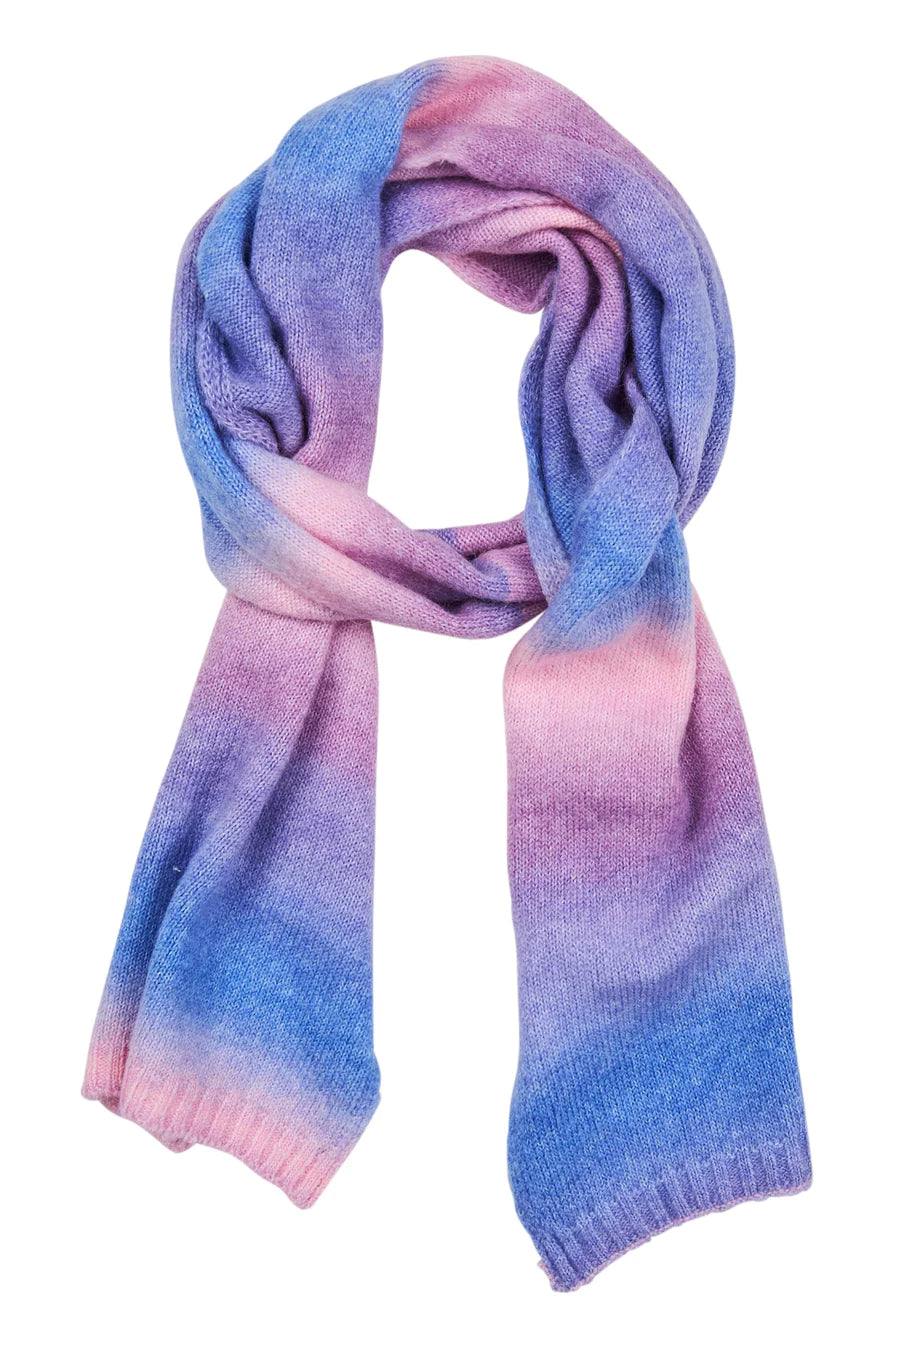 St Clair Scarf - Haven